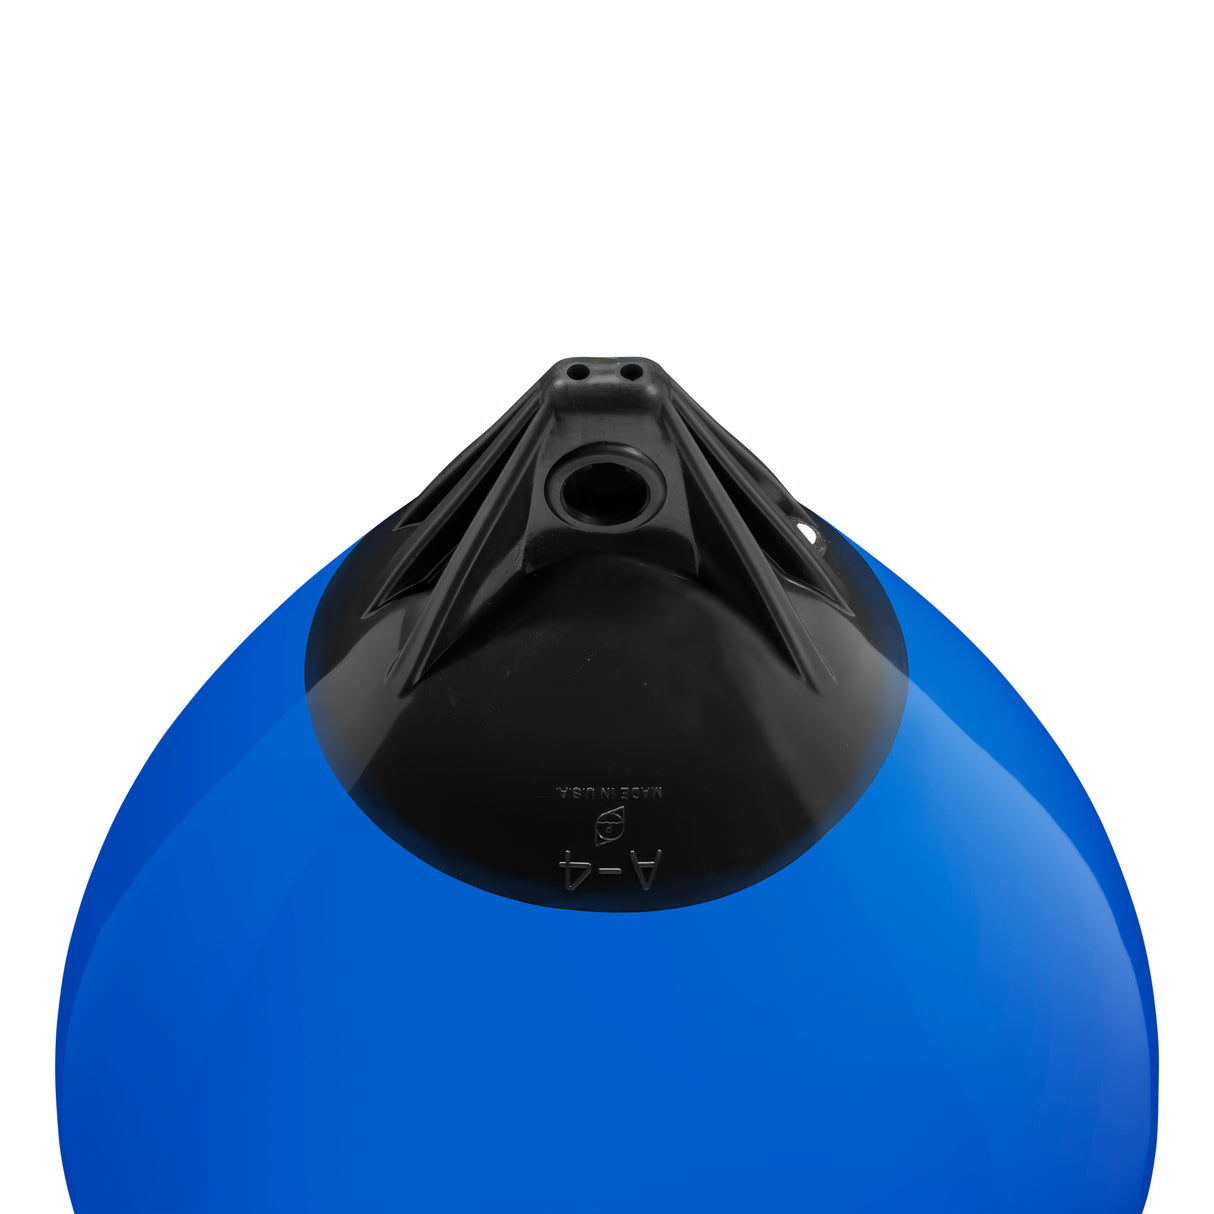 Blue buoy with Black-Top, Polyform A-4 angled shot